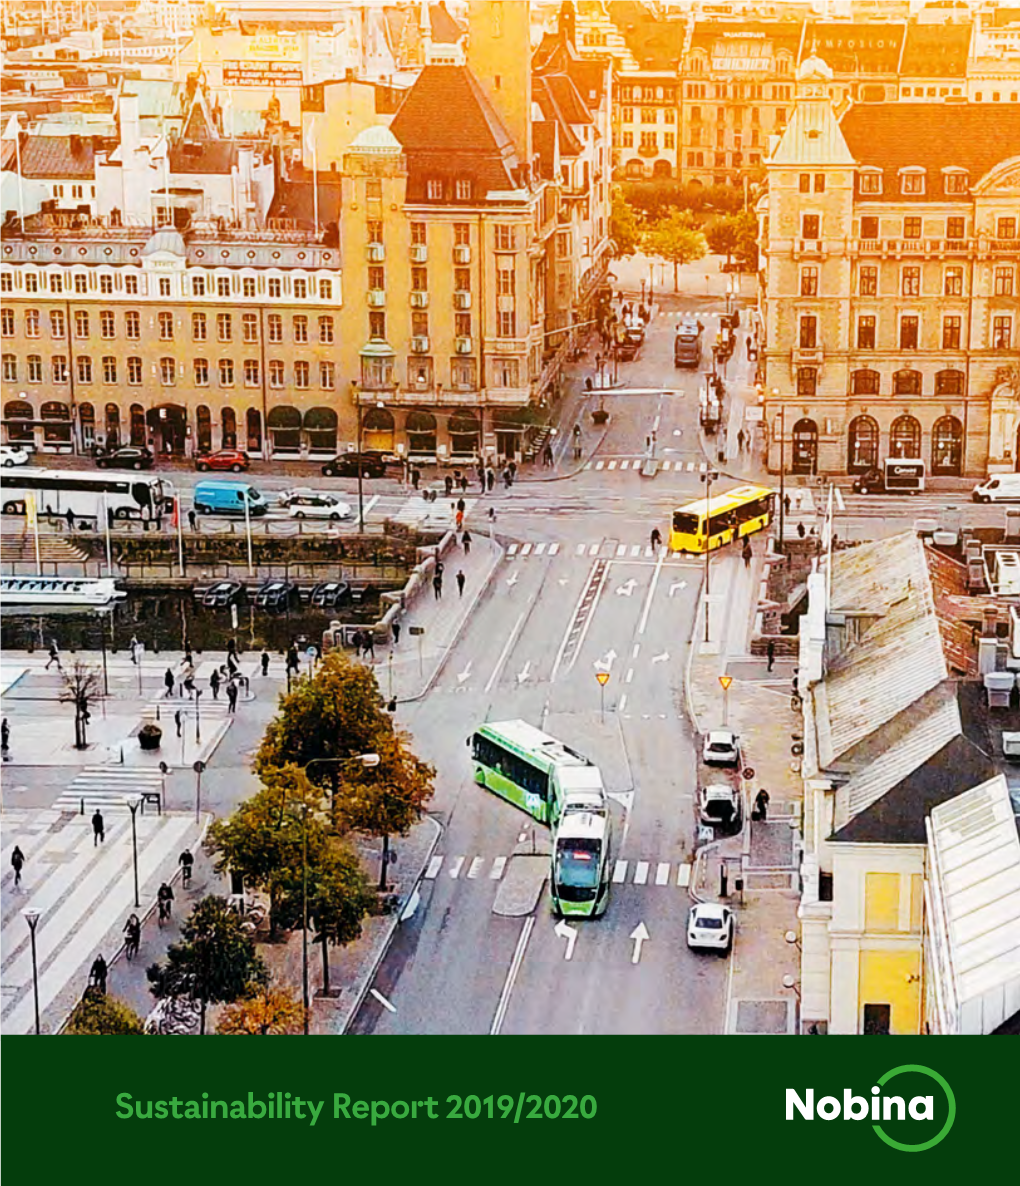 Sustainability Report 2019/2020 “Through Leading and Smart Transport Solutions, We Help to Realise the Sustainable Society of the Future – Already Today.”